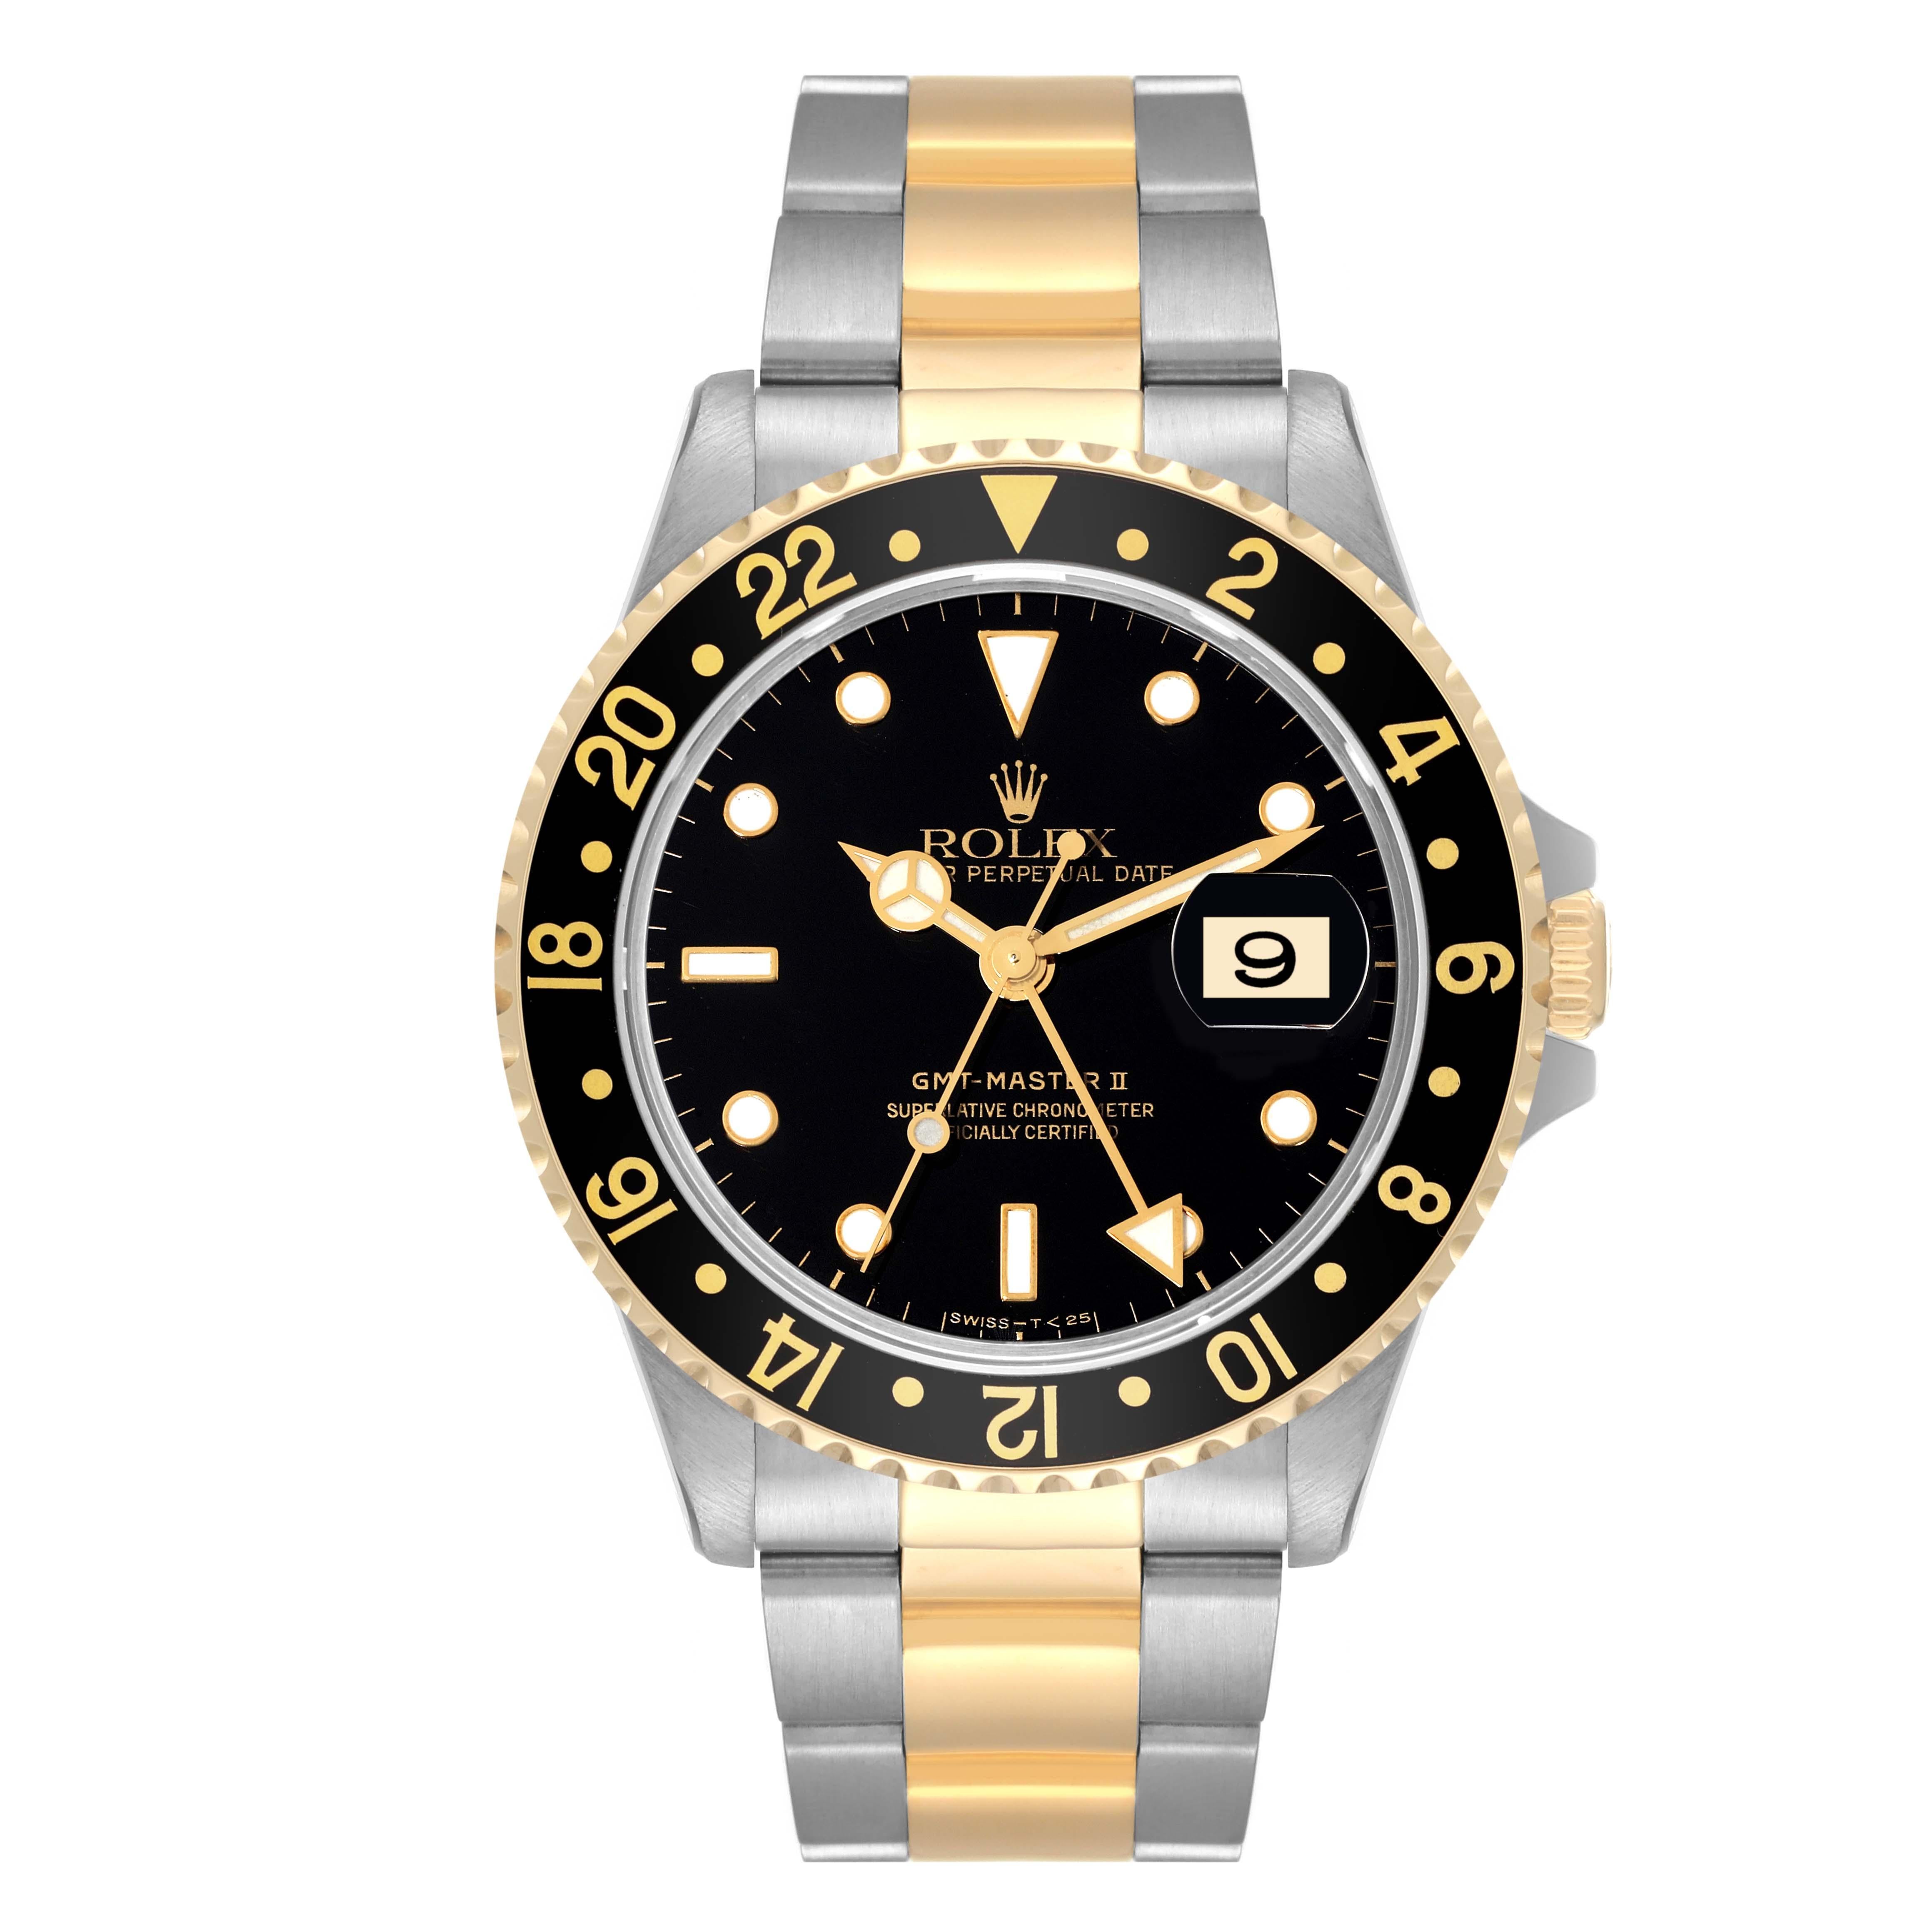 Rolex GMT Master II Yellow Gold Steel Oyster Bracelet Mens Watch 16713. Officially certified chronometer automatic self-winding movement. Stainless steel case 40 mm in diameter. Rolex logo on a crown. 18k yellow gold bidirectional rotating bezel